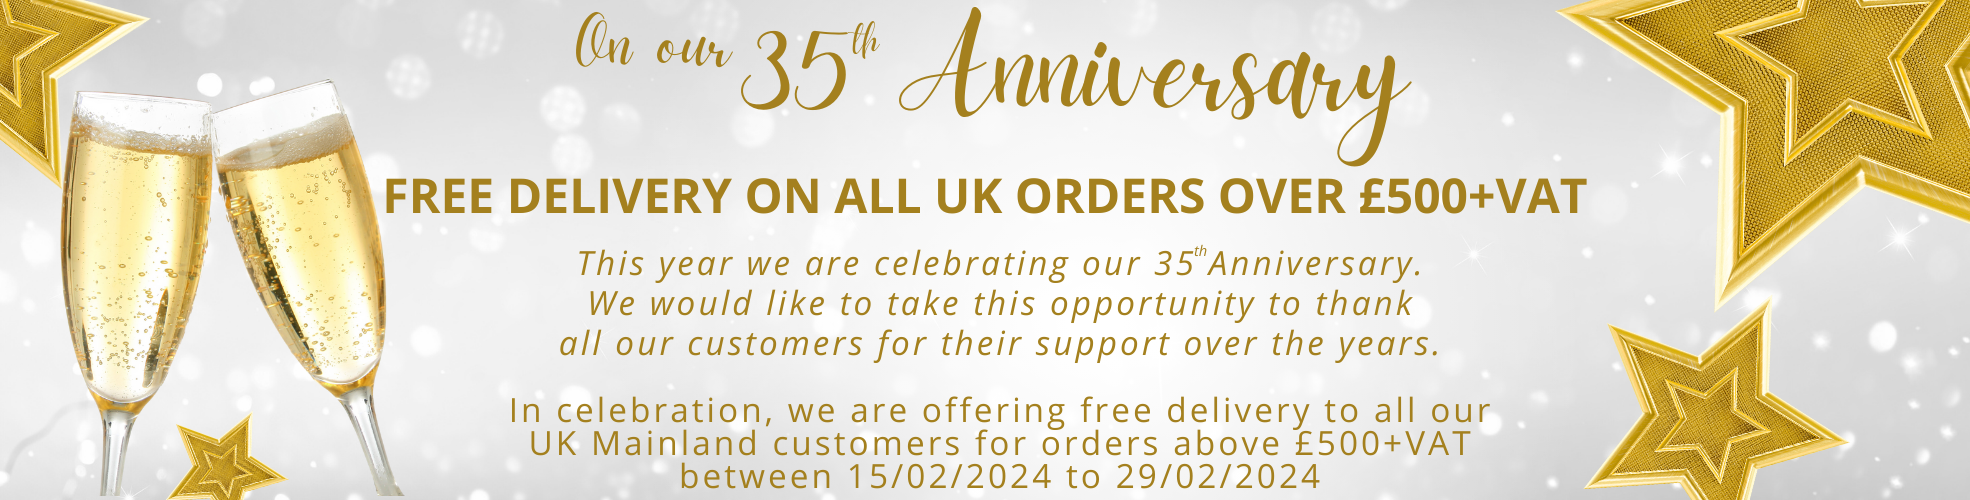 On Our 35th Anniversary
Free Delivery on all UK orders over £500+VAT
This year we are celebrating our 35th Anniversary.
We would like to take this opportunity to thank all our customers for their support over the years.
In celebration, we are offering free delivery to all our UK Mainland customers for orders above £500+VAT between 15/02/2024 to 29/02/2024